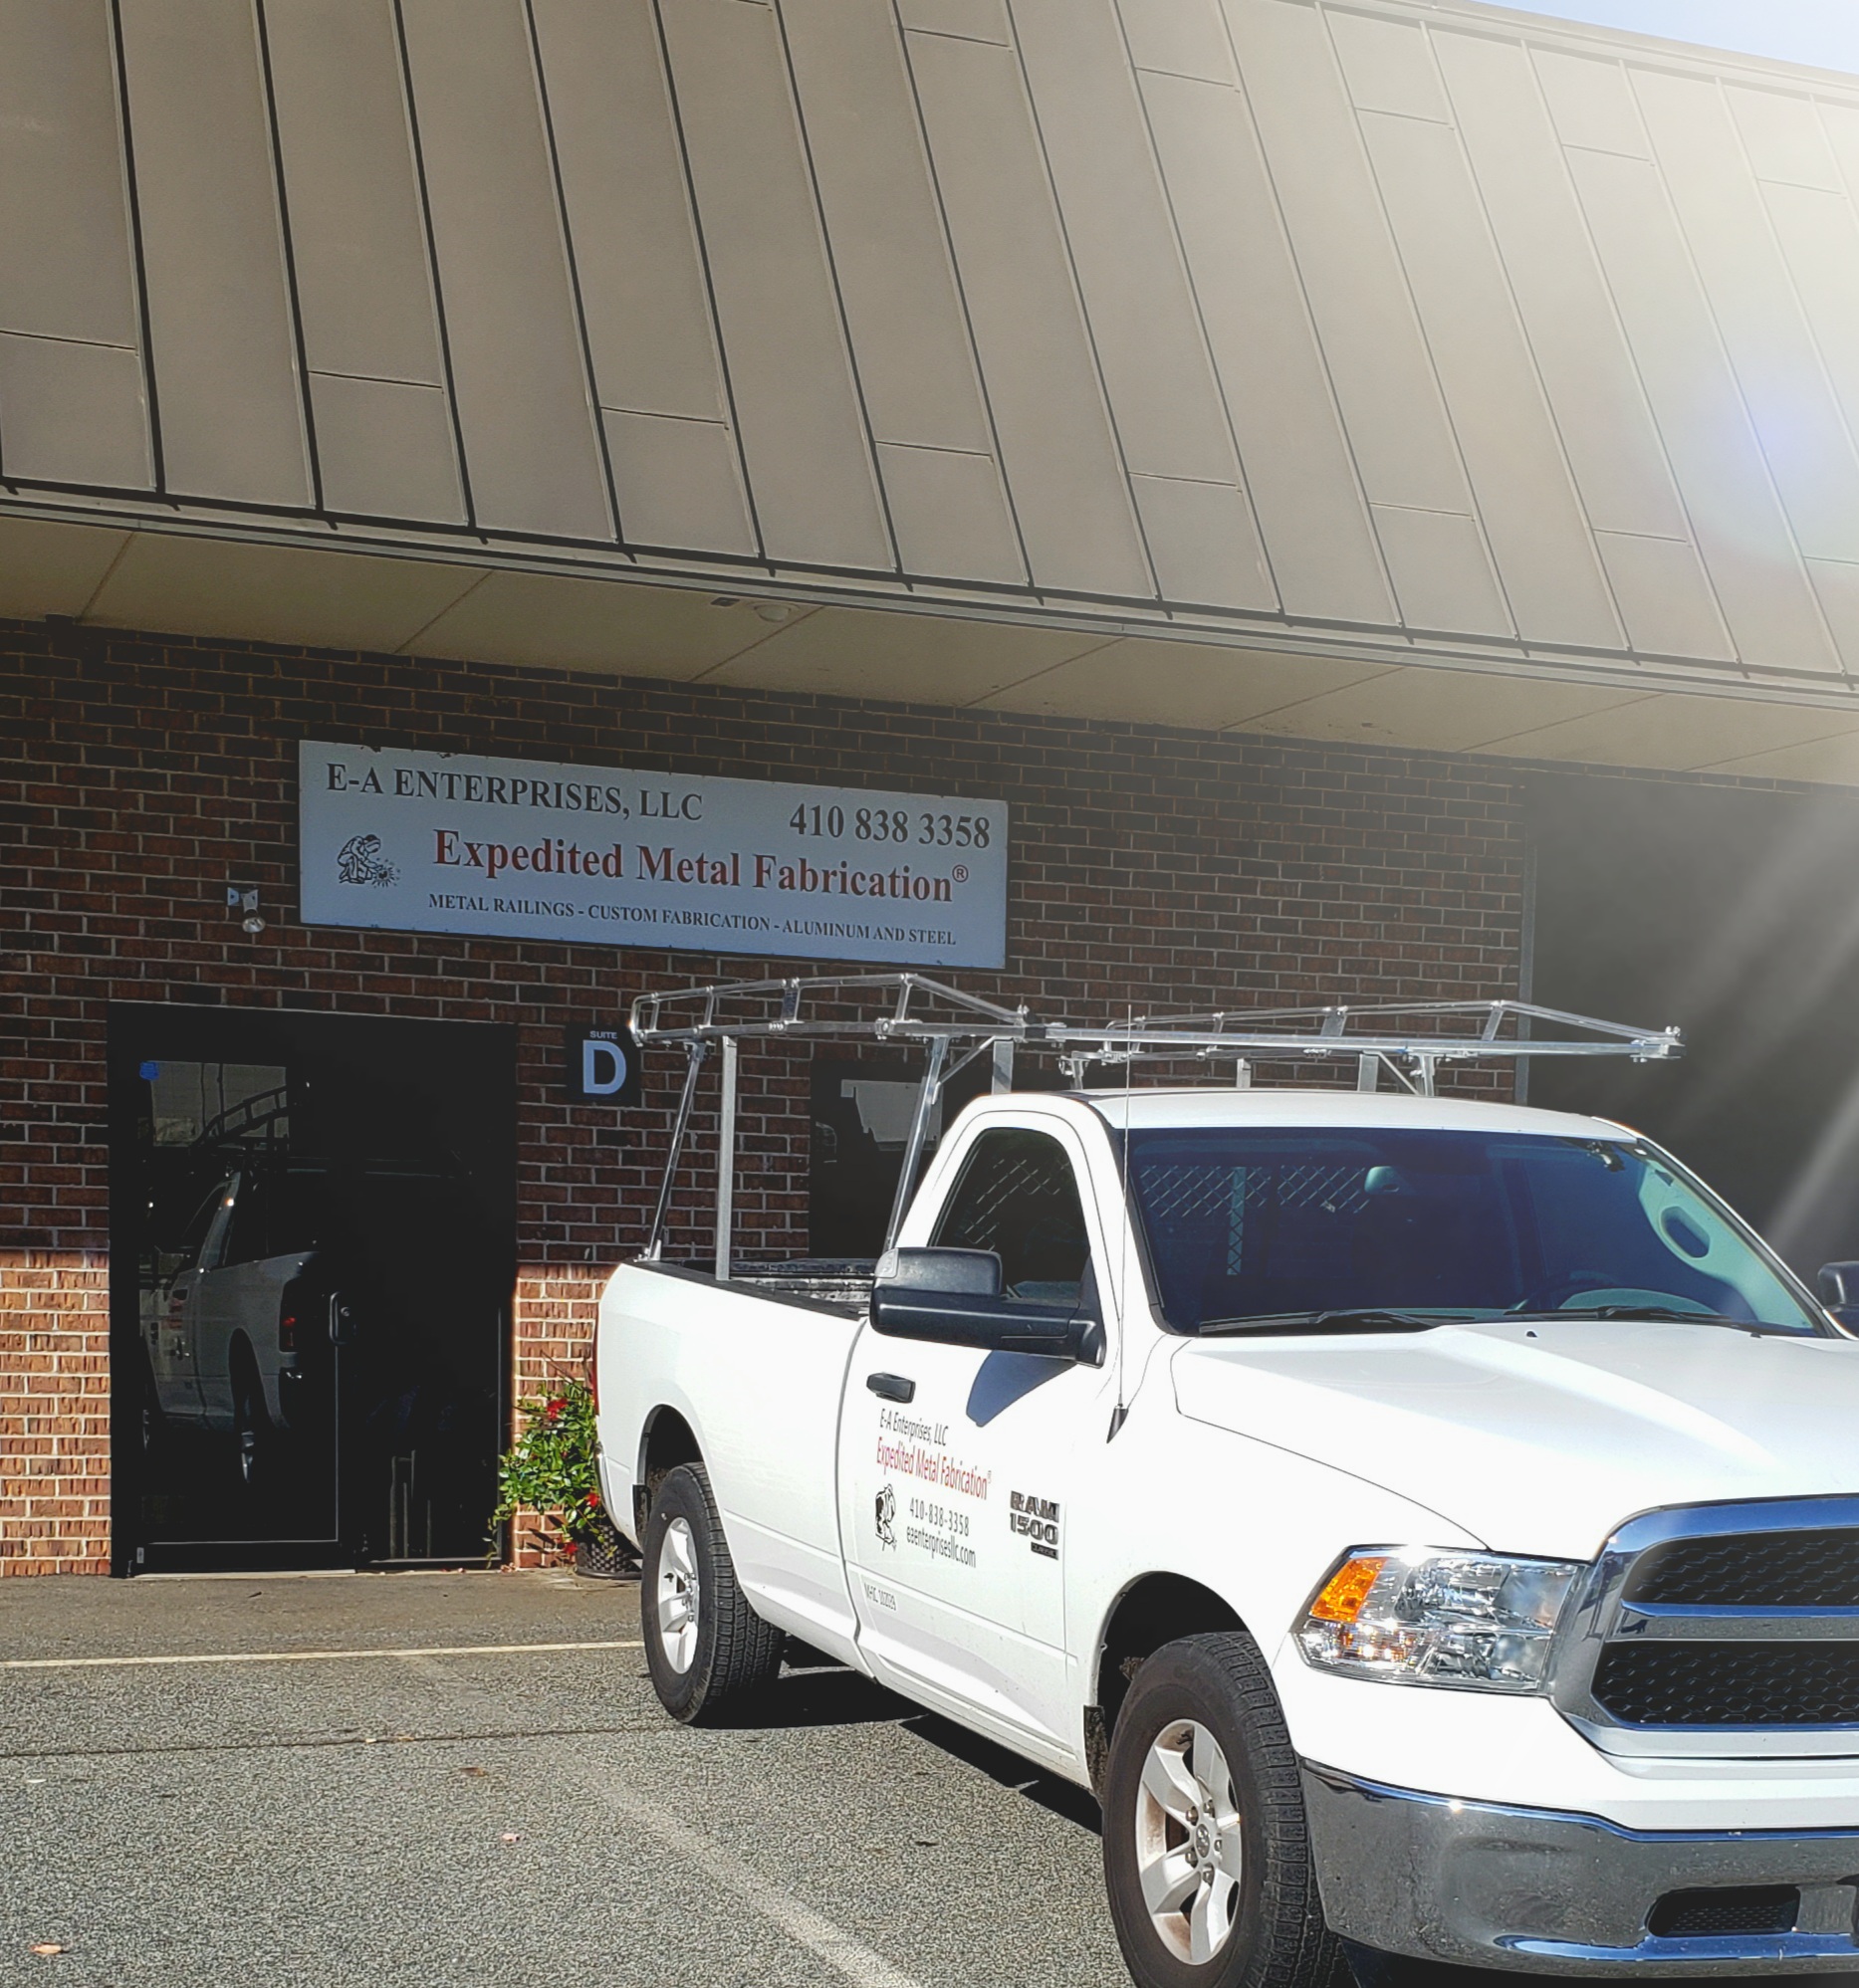 Exterior of E-A Enterprises LLC's location at 341 Granary Road, Suite D, Forest Hill, MD 21050